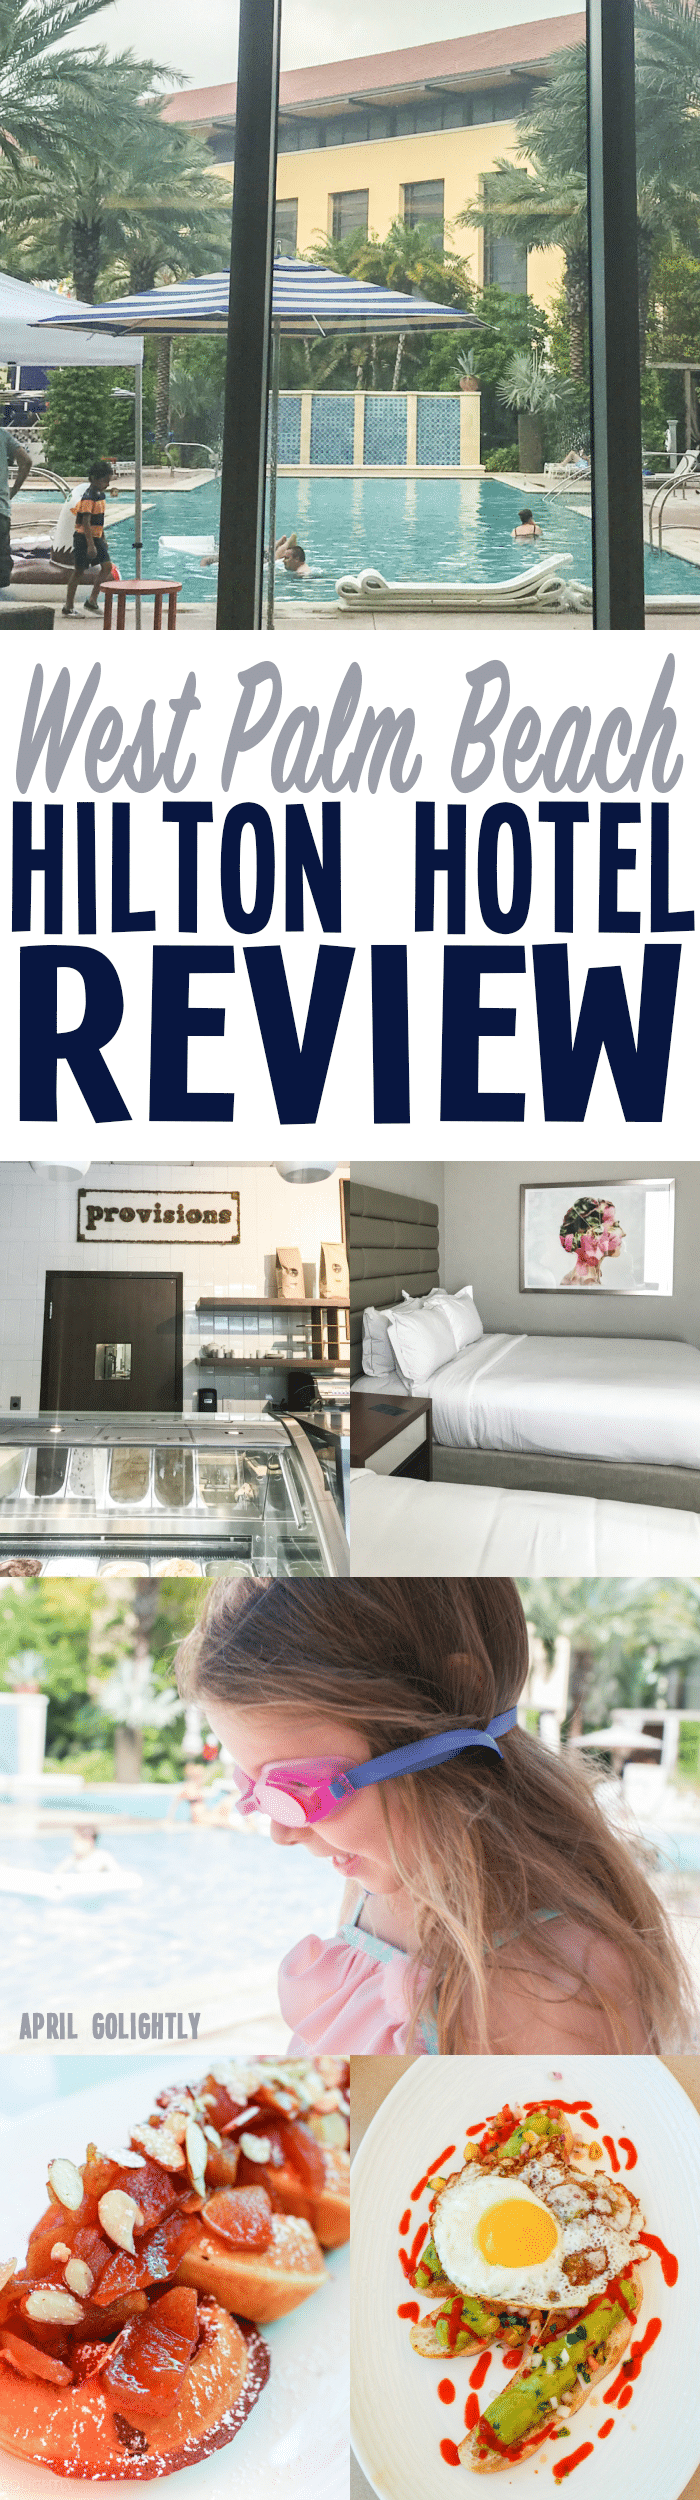 Hilton Downtown West Palm Beach Hotel Review with 7 reasons you will love staying at this resort style hotel in South Florida